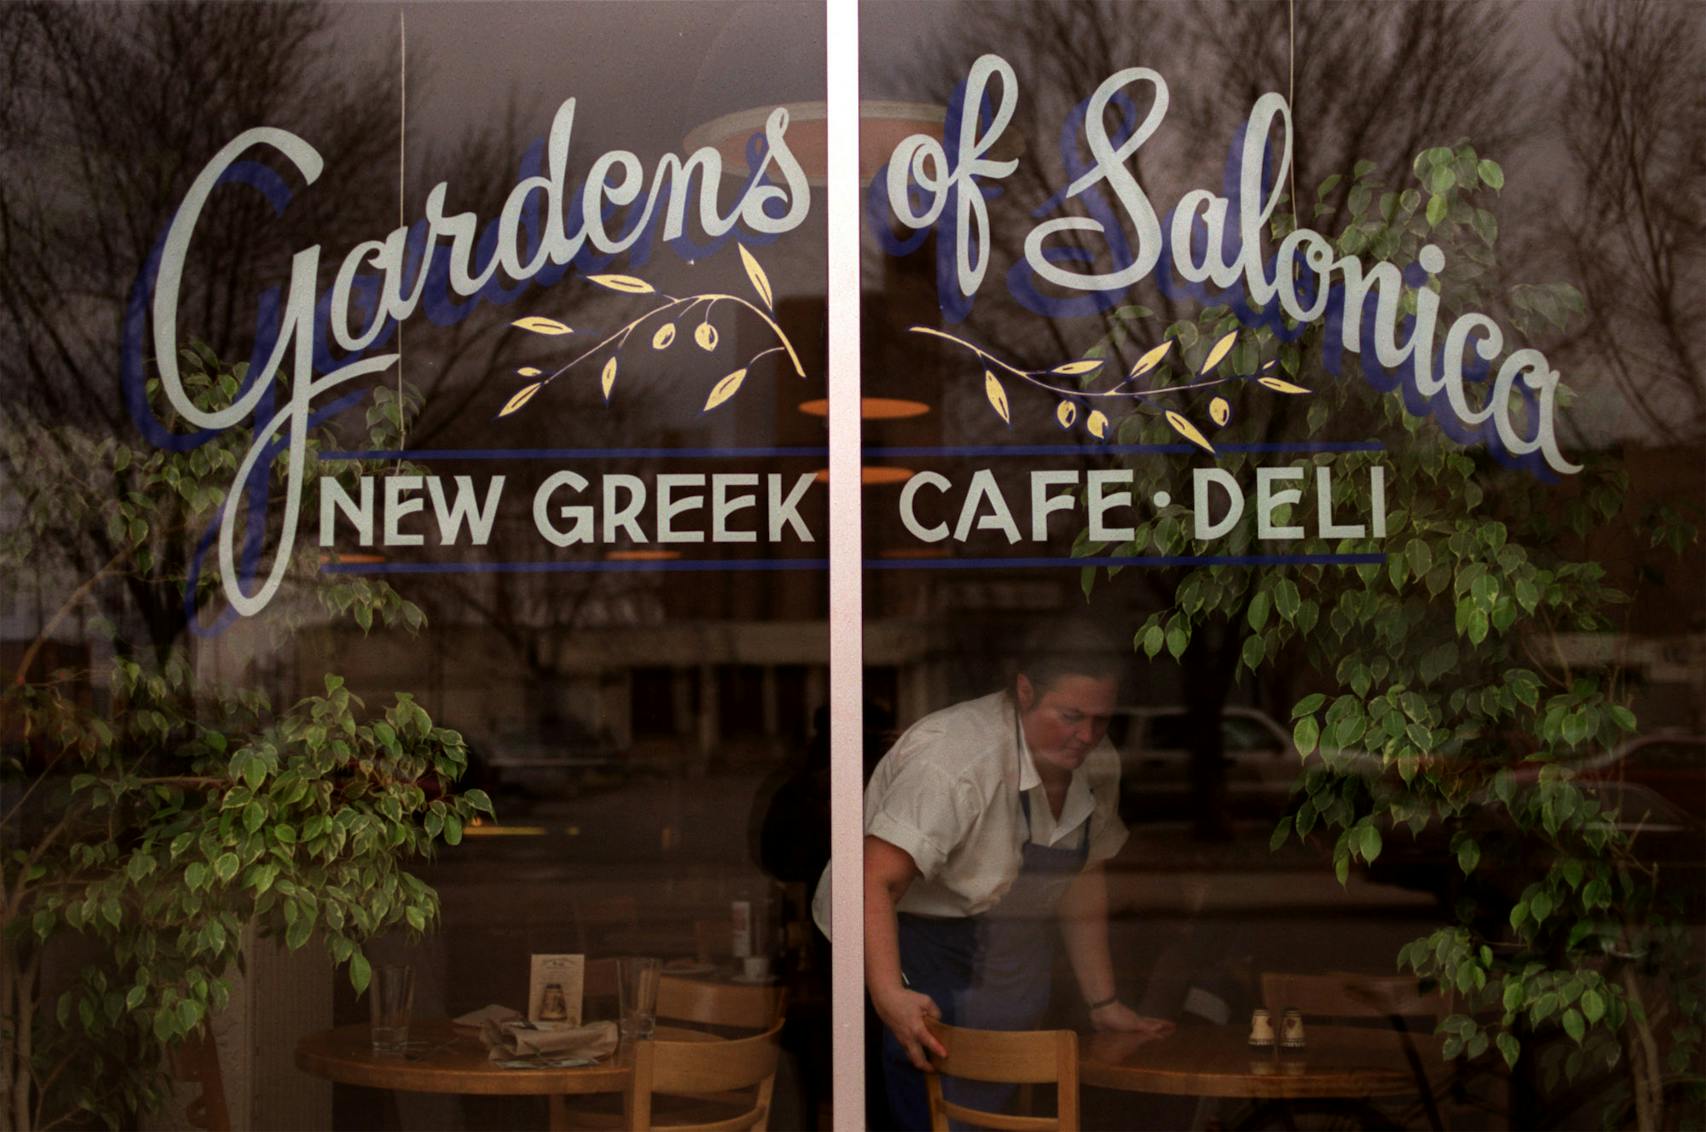 Taste East Hennepin Neighborhood story on the eating establishments. — Anna Christoforides cleans up the tables in the window at The Garden Of Salonica New Greek Cafe and Deli on the North East side.